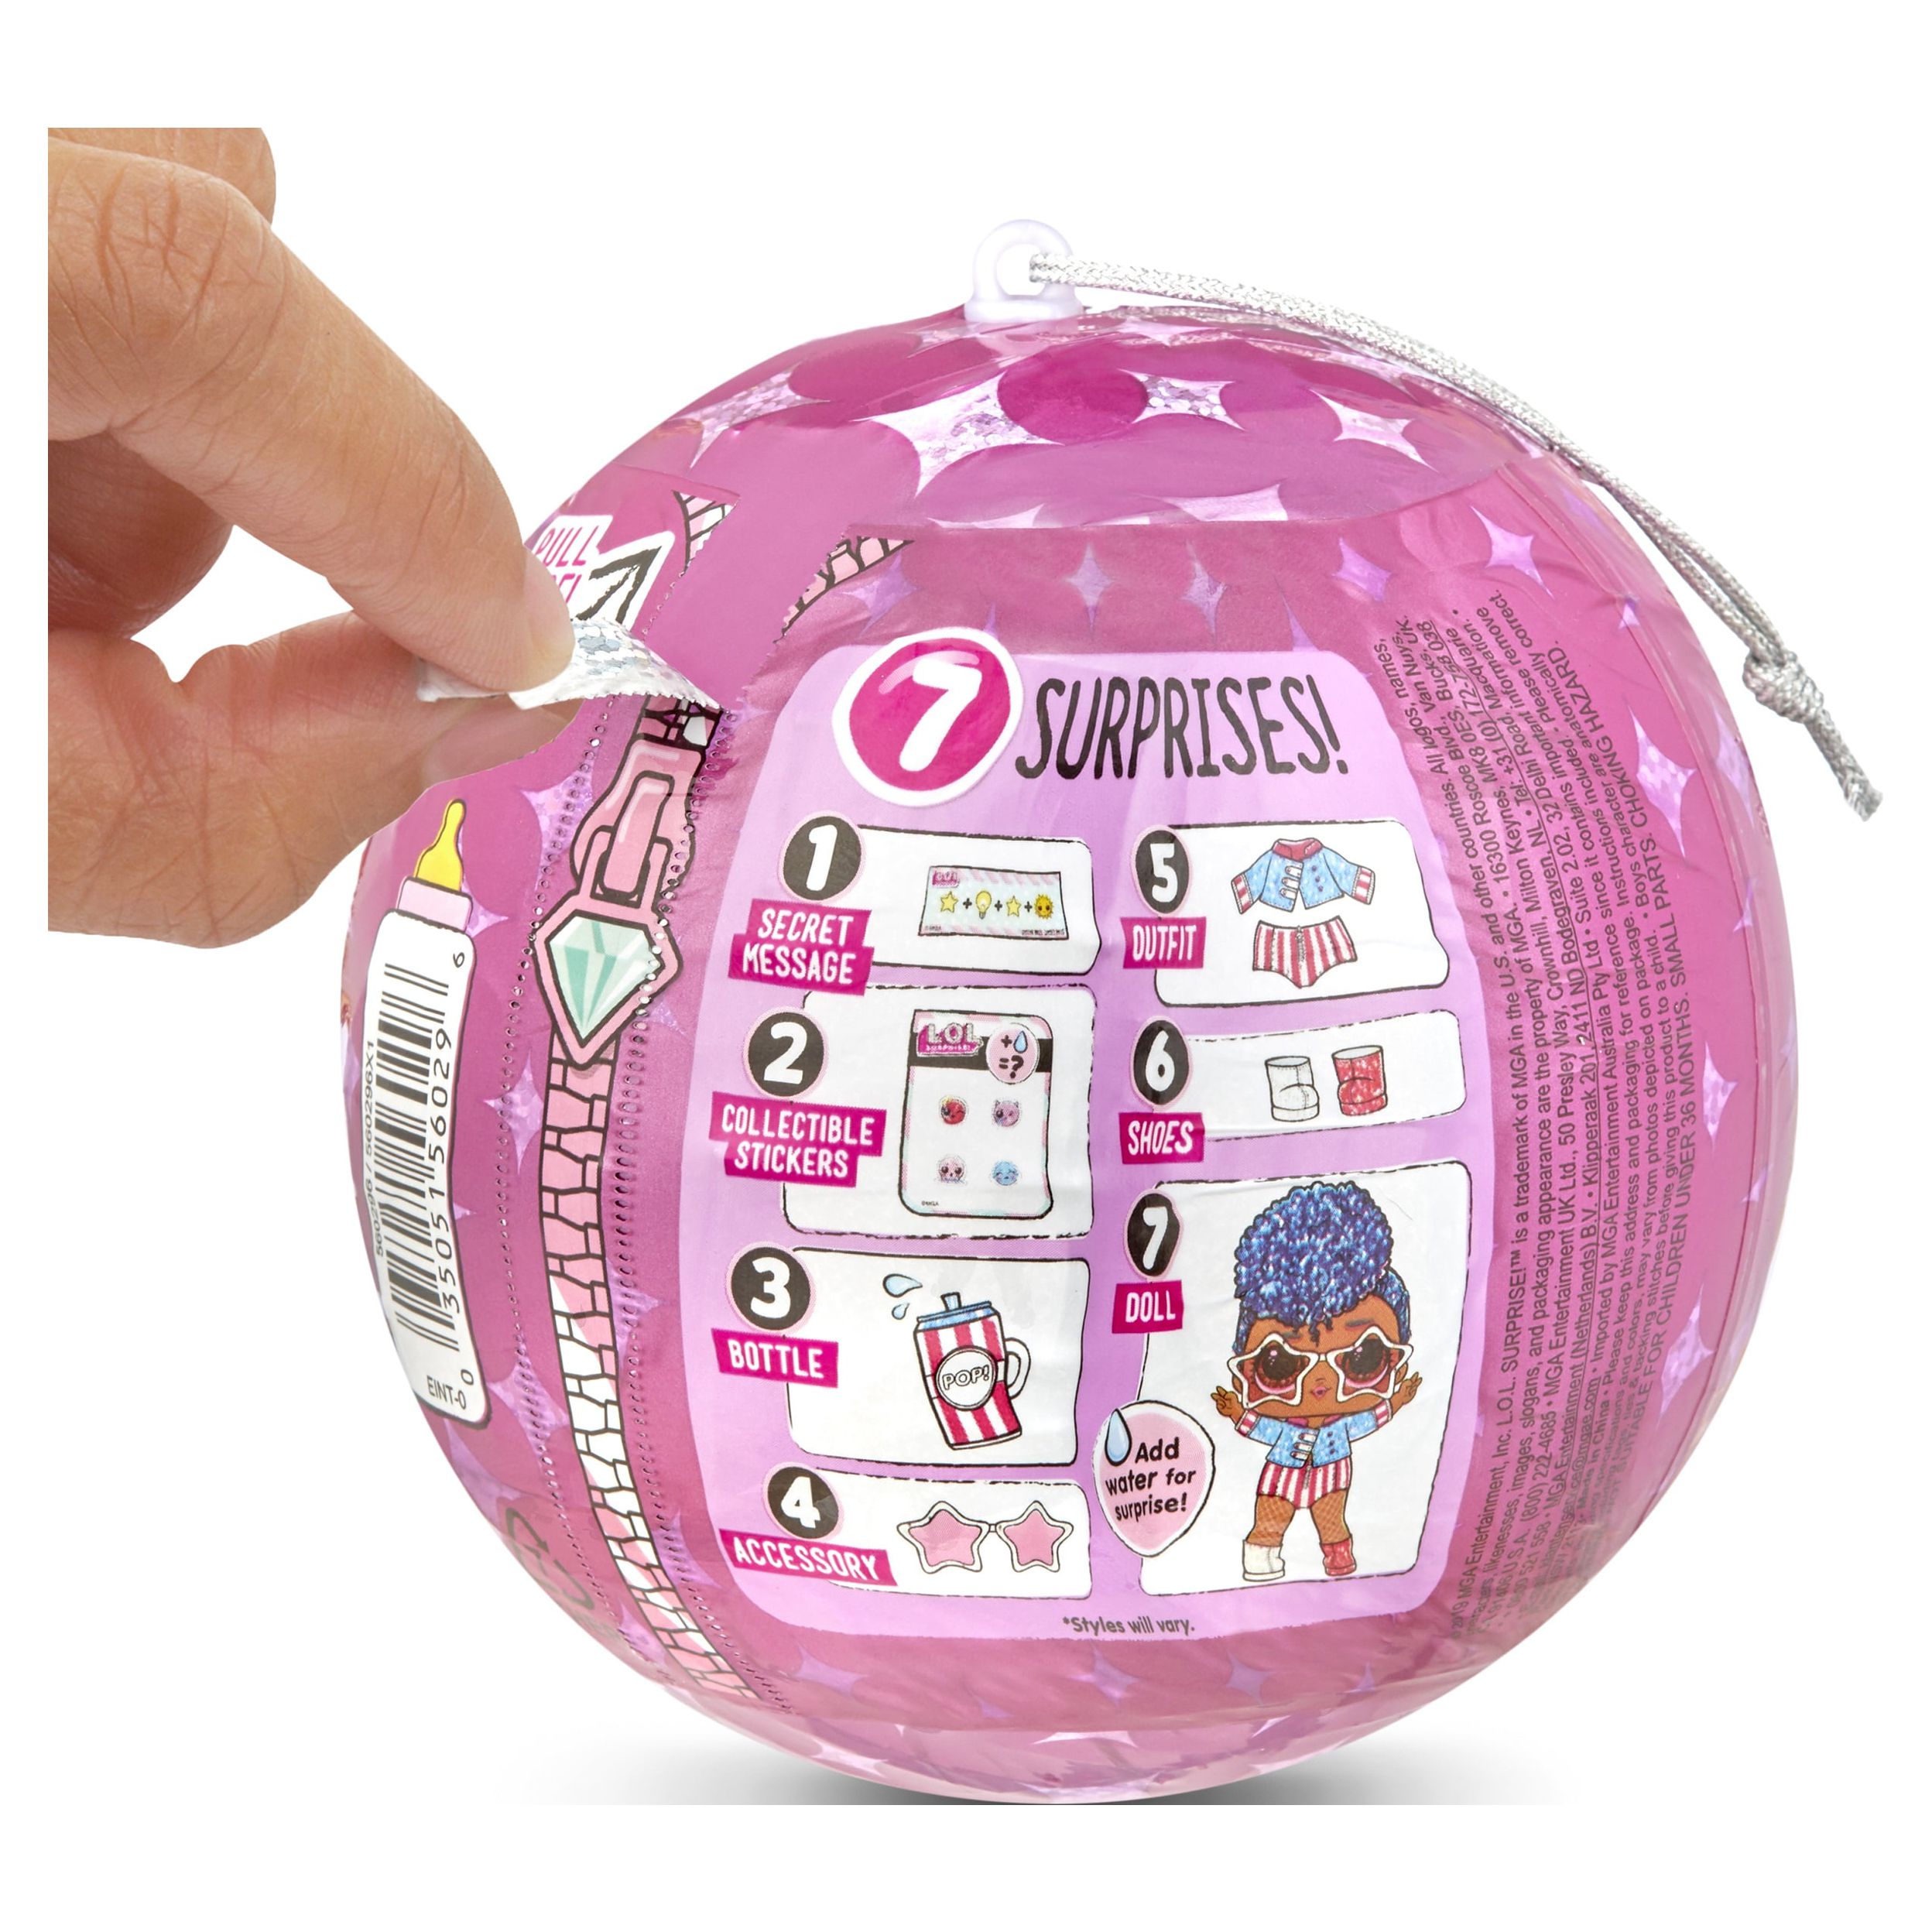 LOL Surprise Sparkle Series With Glitter Finish And 7 Surprises, Great Gift for Kids Ages 4 5 6+ - image 2 of 6